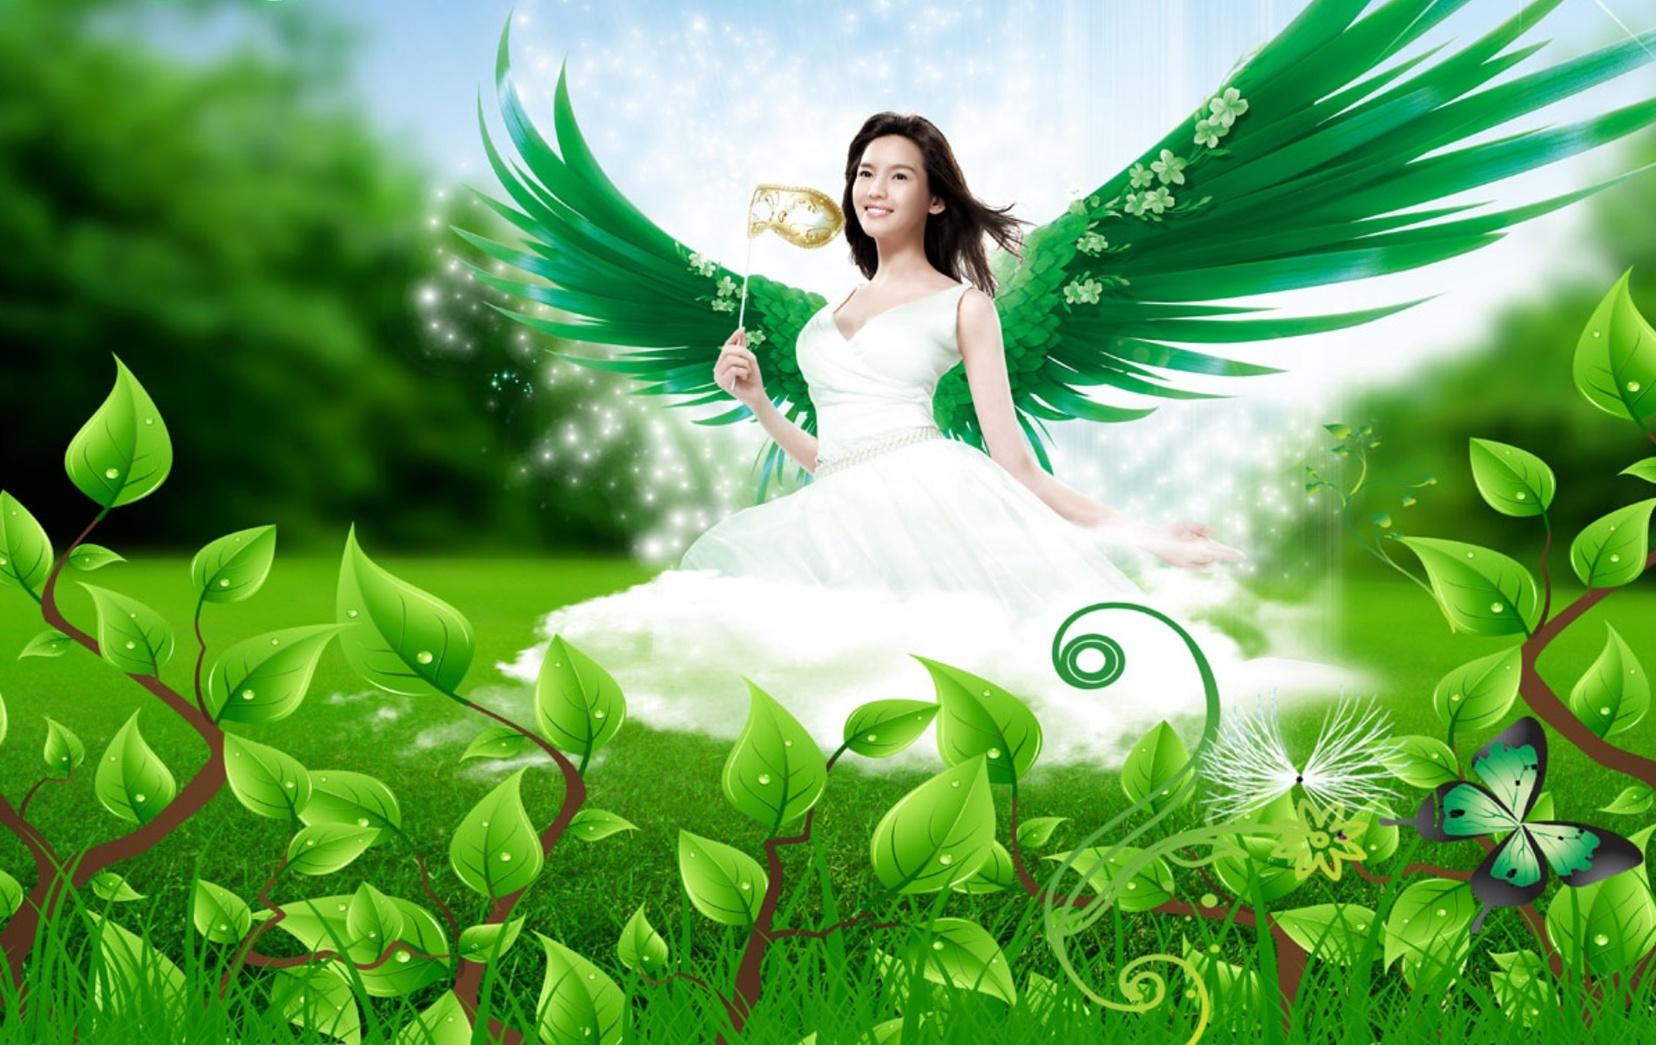 Green Angel Download HD Wallpaper and Free Image